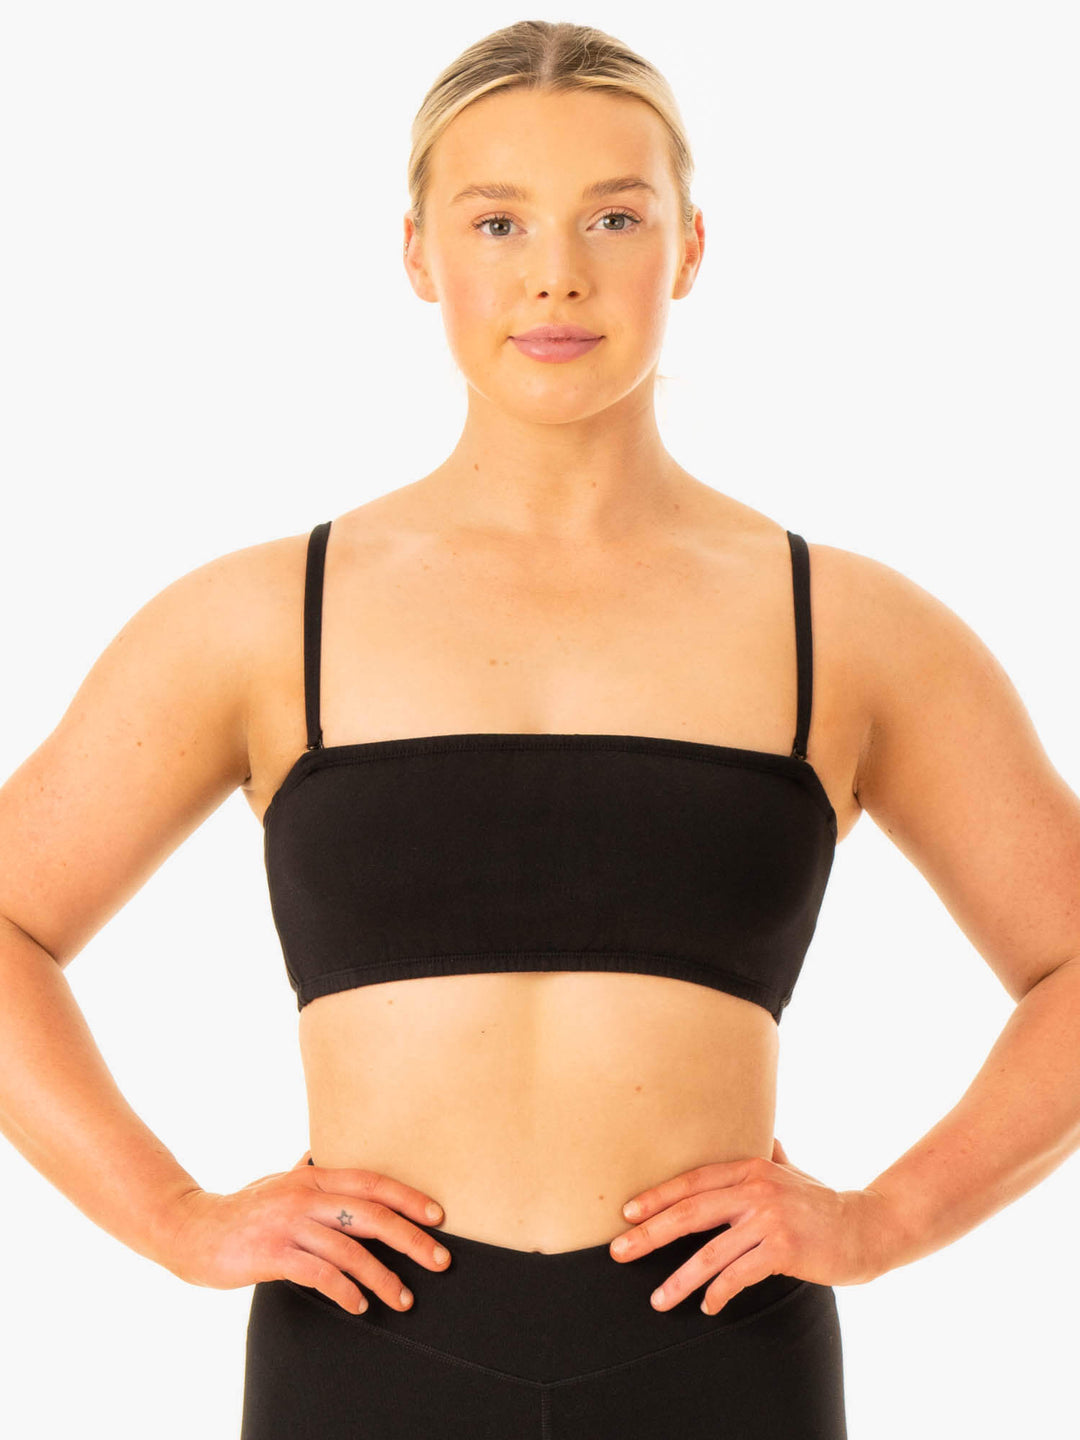 Bralettes and Bandeaus for Women